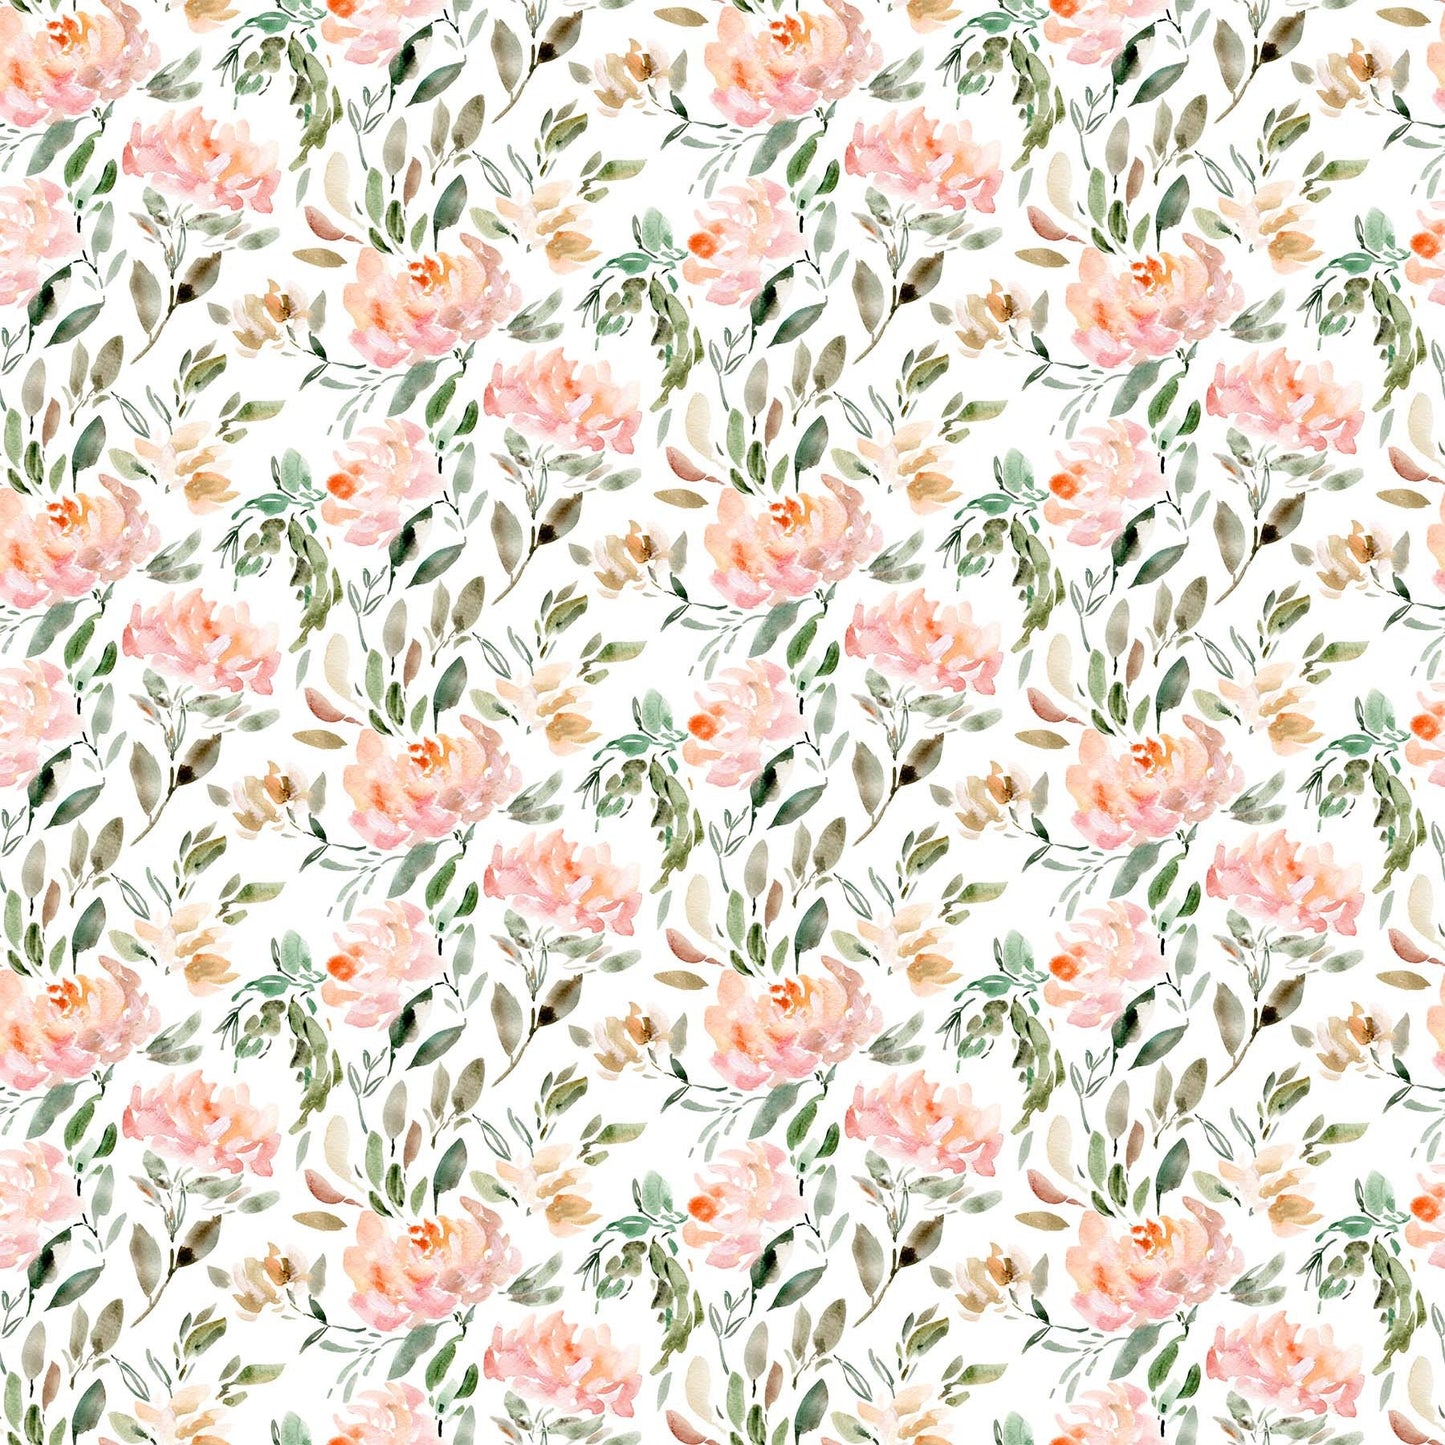 LAST CALL Refresh - Bouquet Watercolor Roses Pink Green Floral Fabric, FIGO 90551-10, Cotton Quilt Apparel Fabric, By the Yard